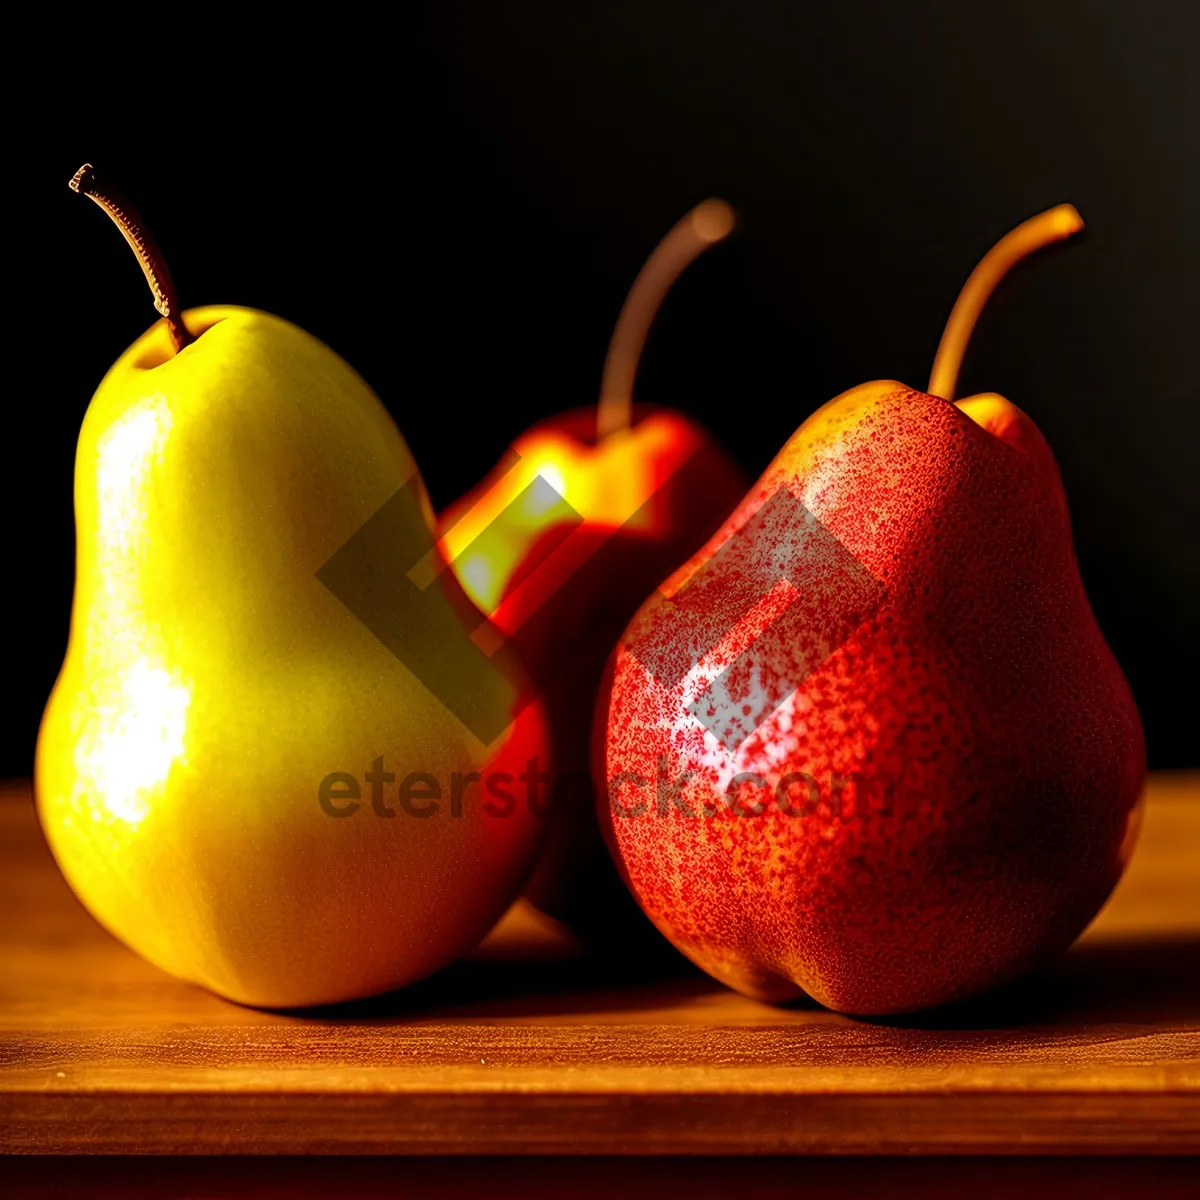 Picture of Ripe, Juicy Pear - Fresh and Nourishing Edible Fruit